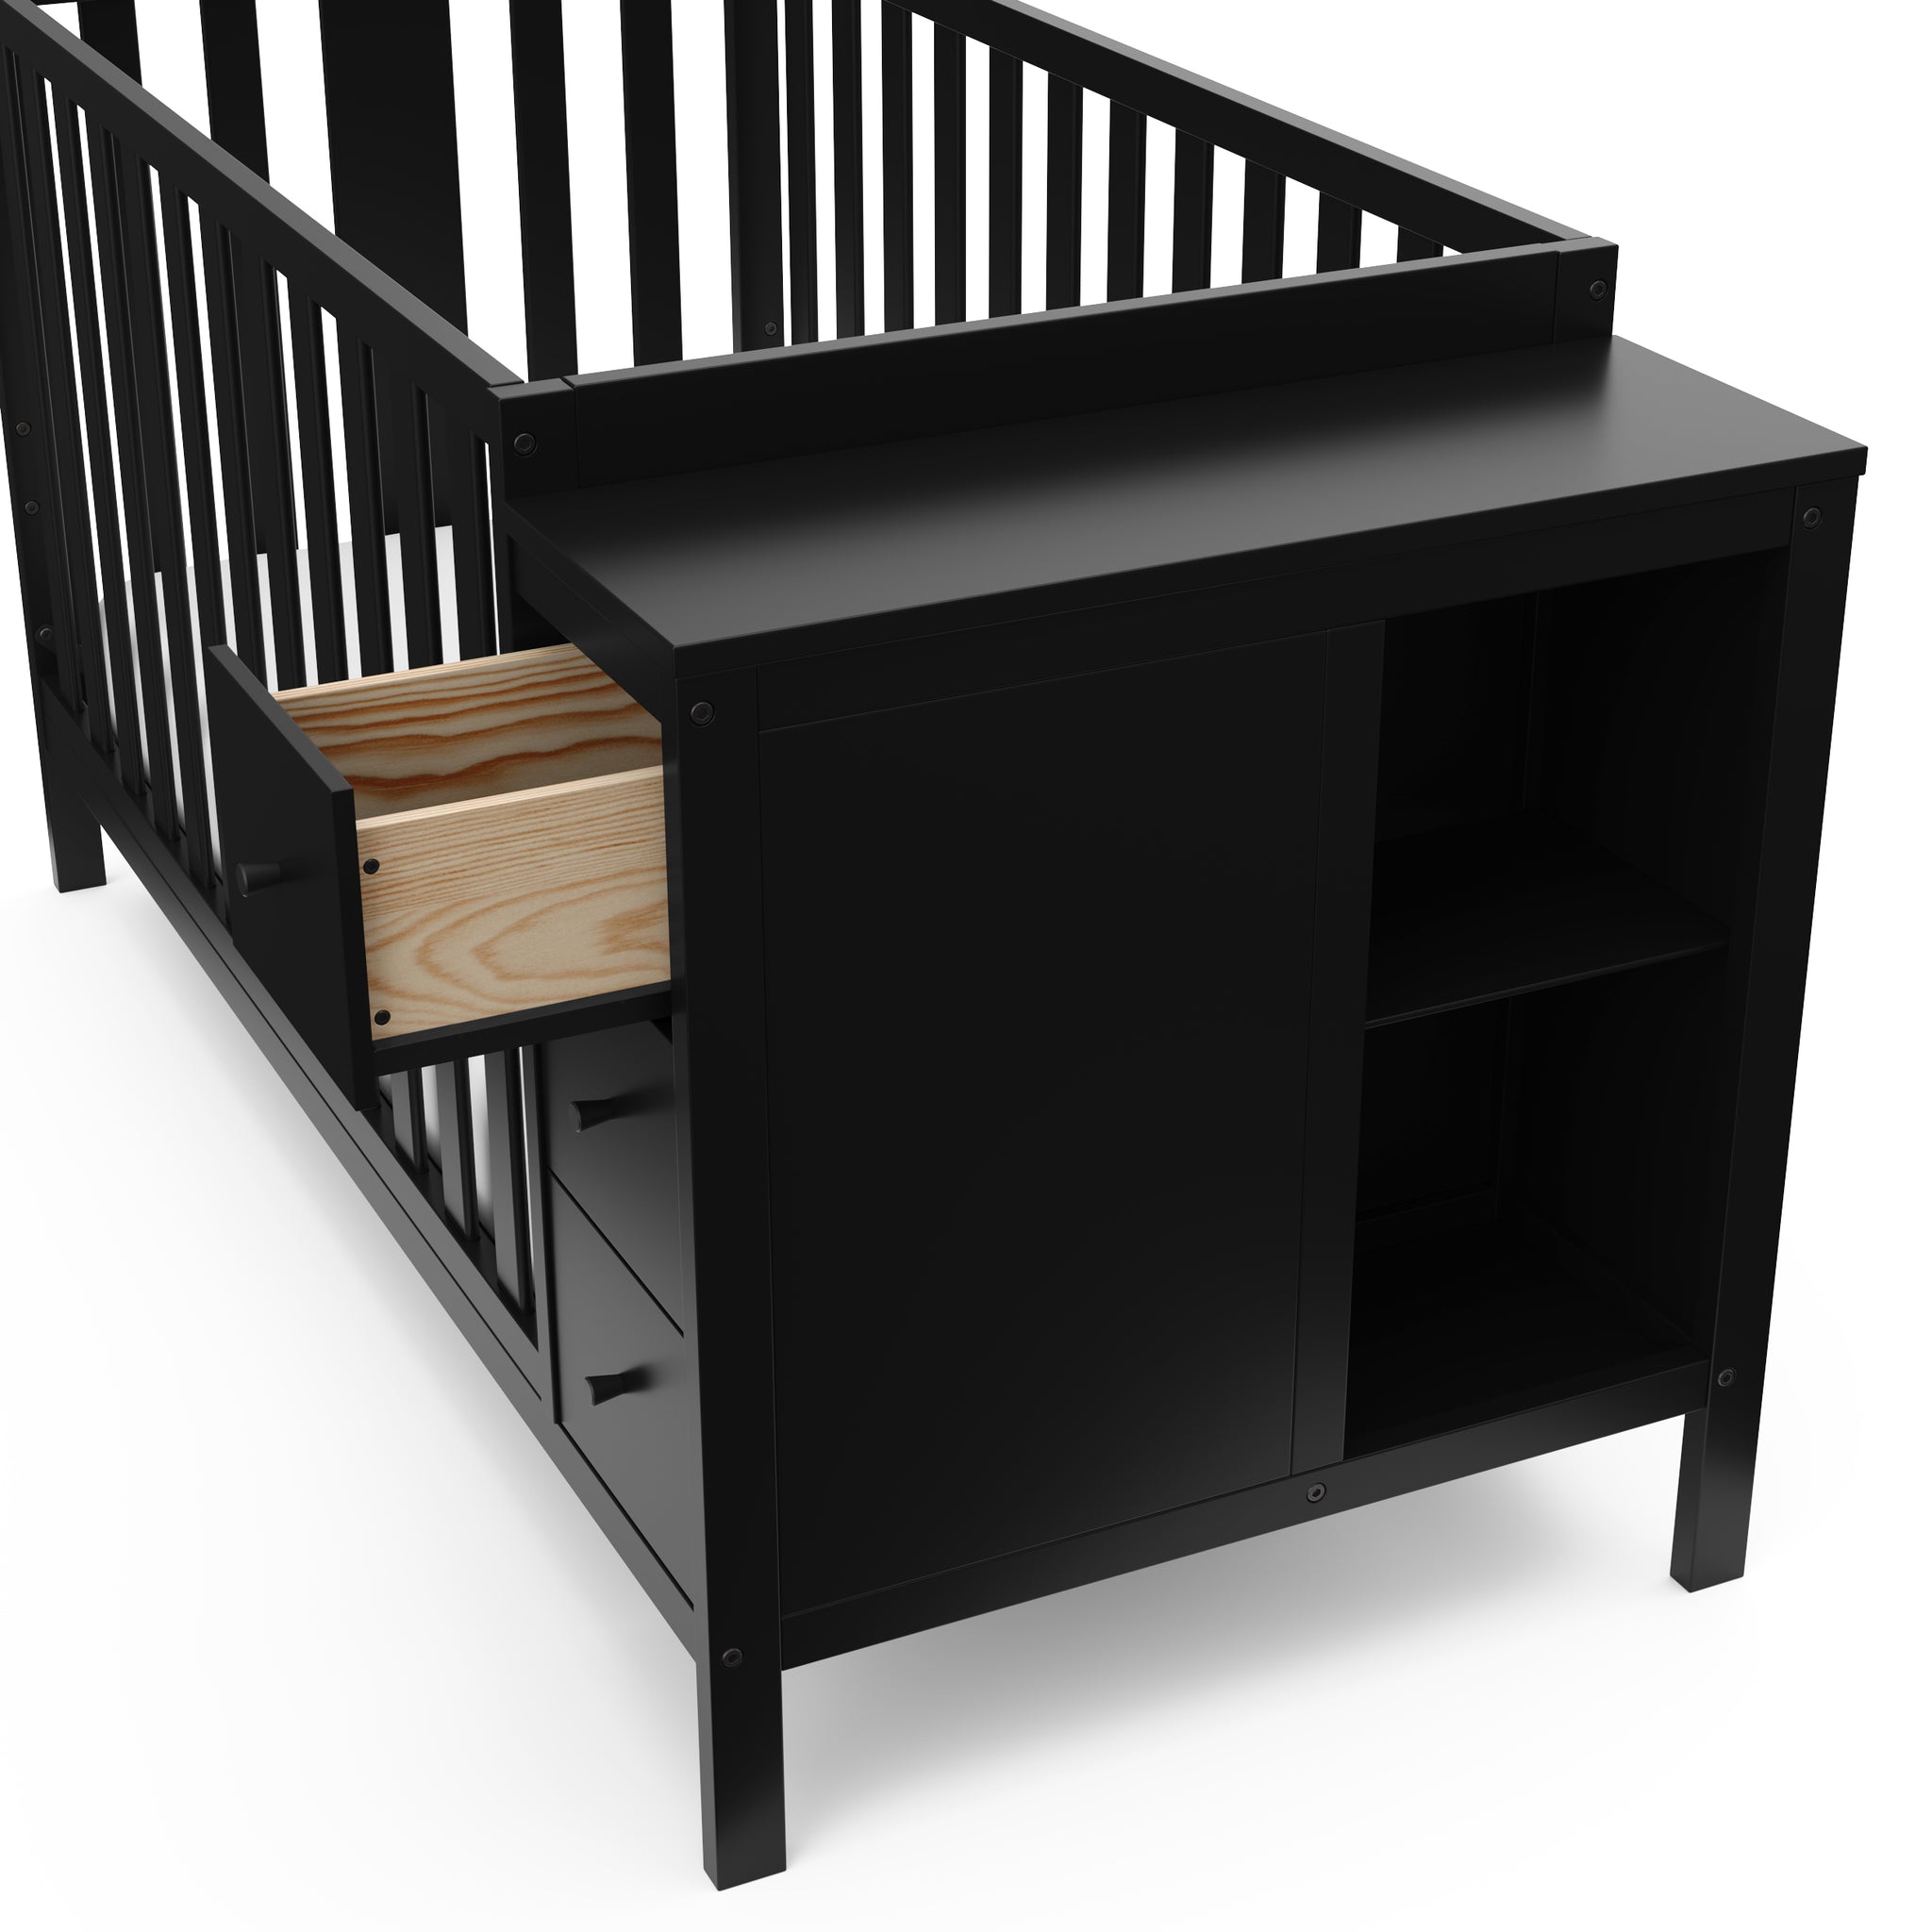 Close-up view of black crib with storage and open drawer